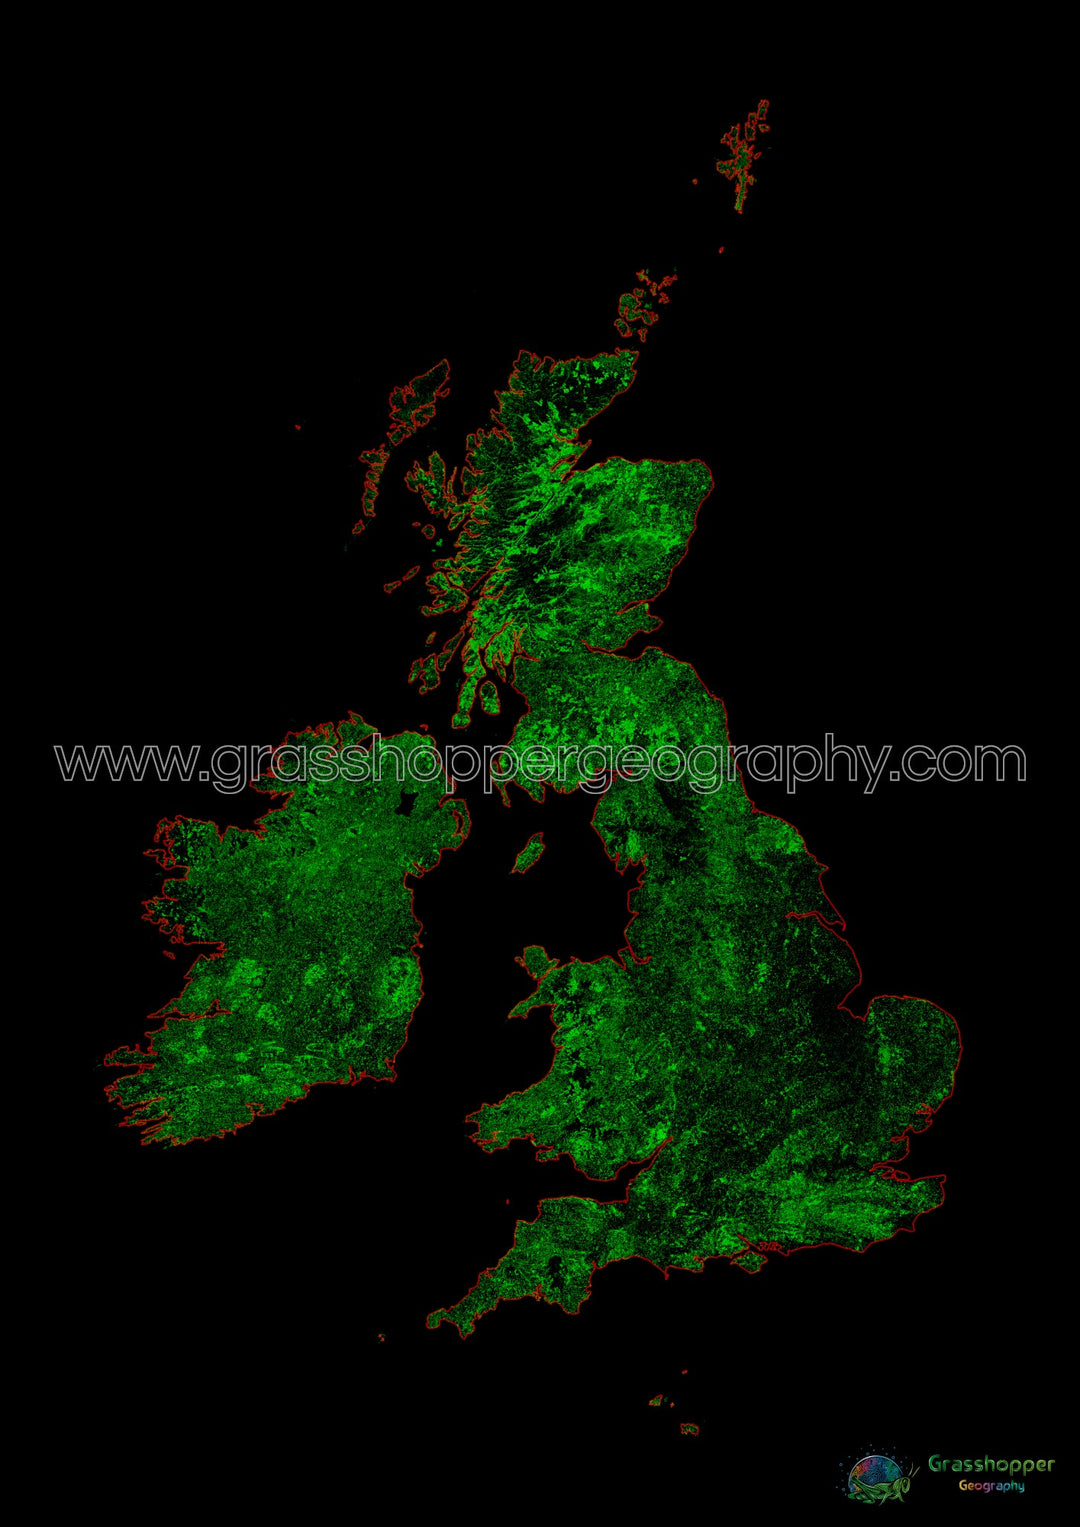 The British Isles - Forest cover map - Fine Art Print